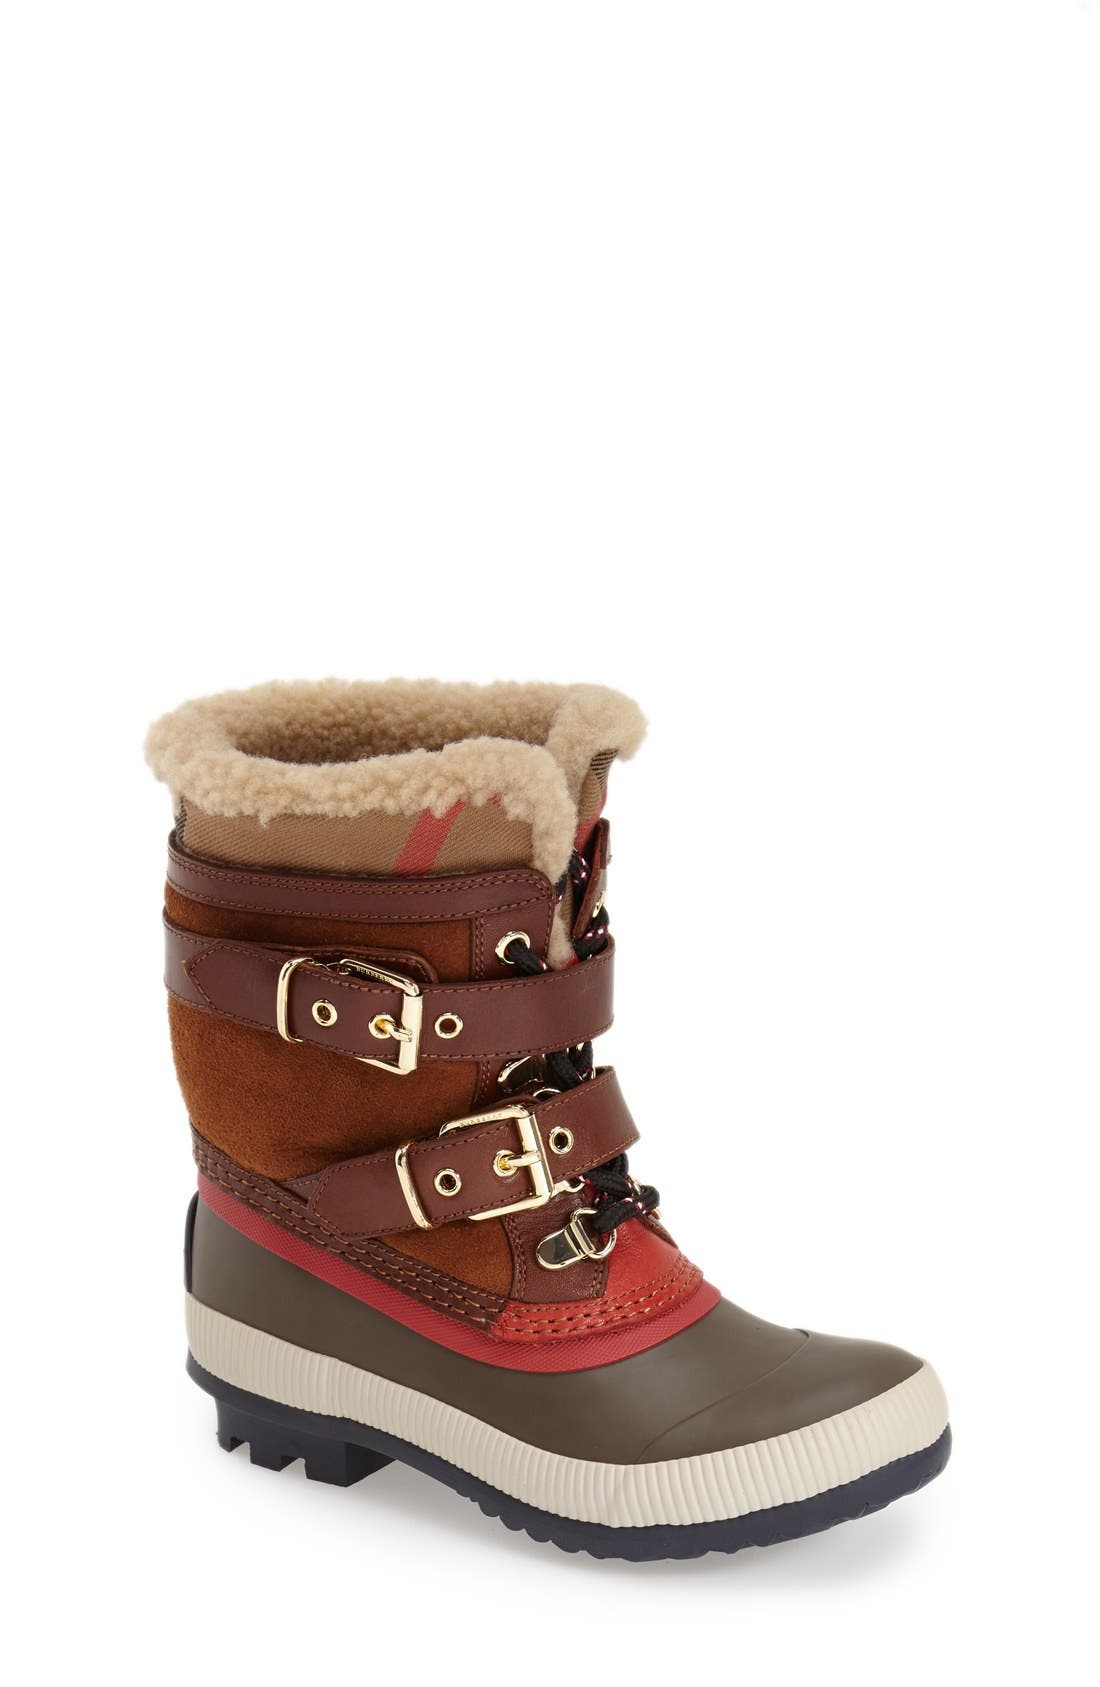 burberry toddler boots